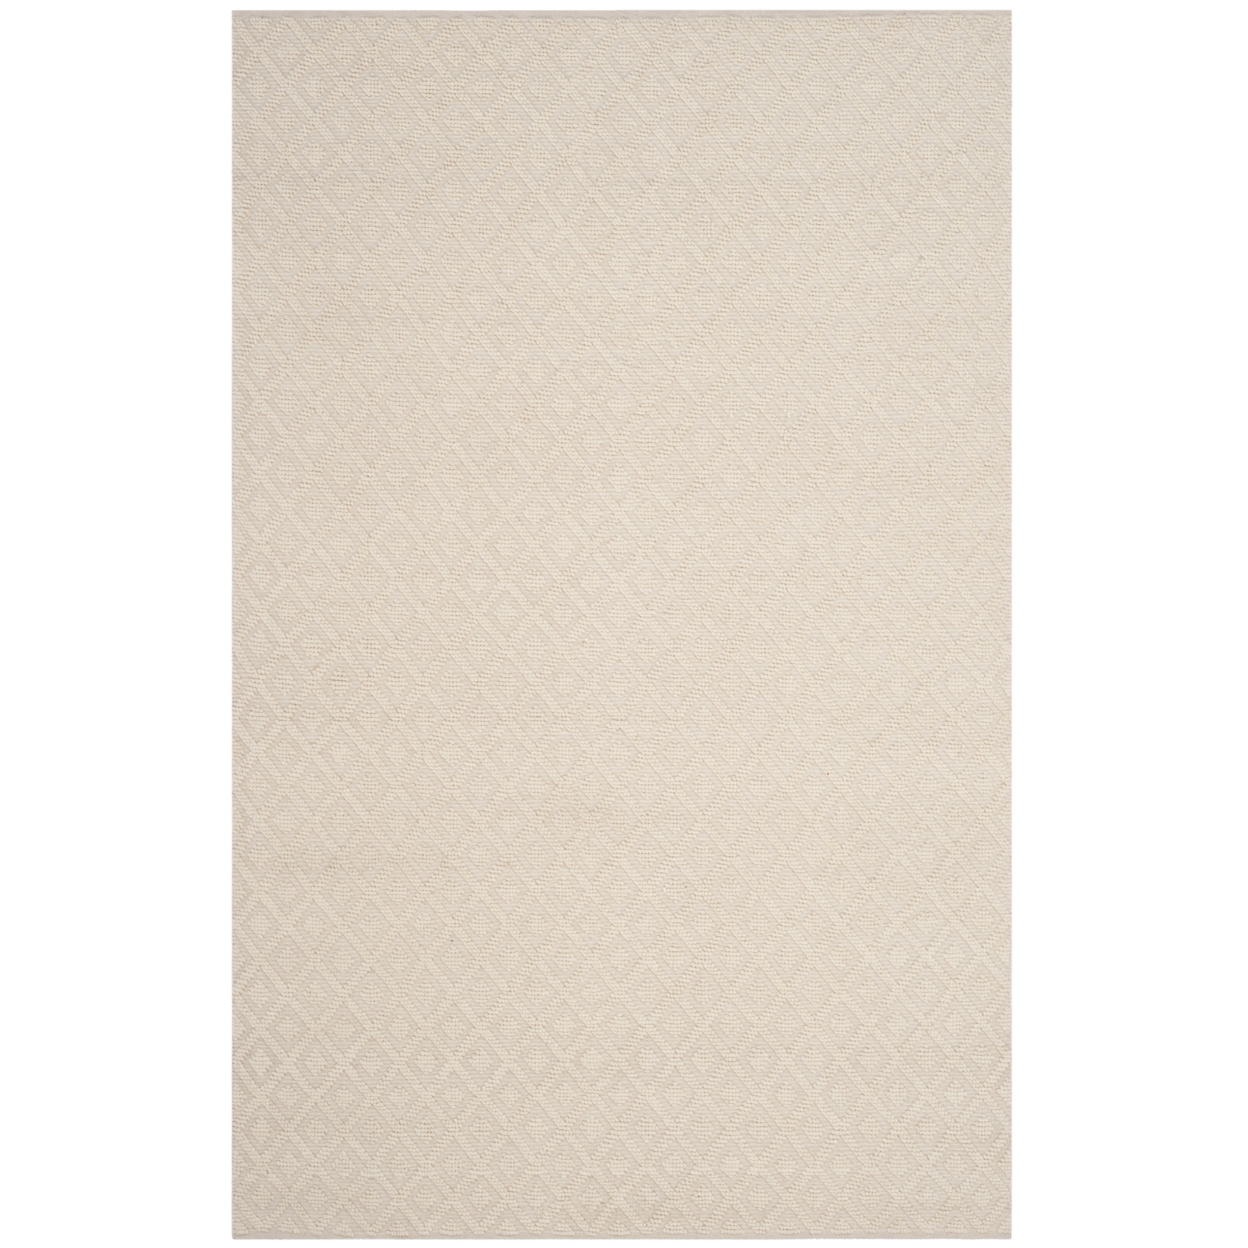 SAFAVIEH Vermont Collection VRM104A Handwoven Ivory Rug - 5 X 8